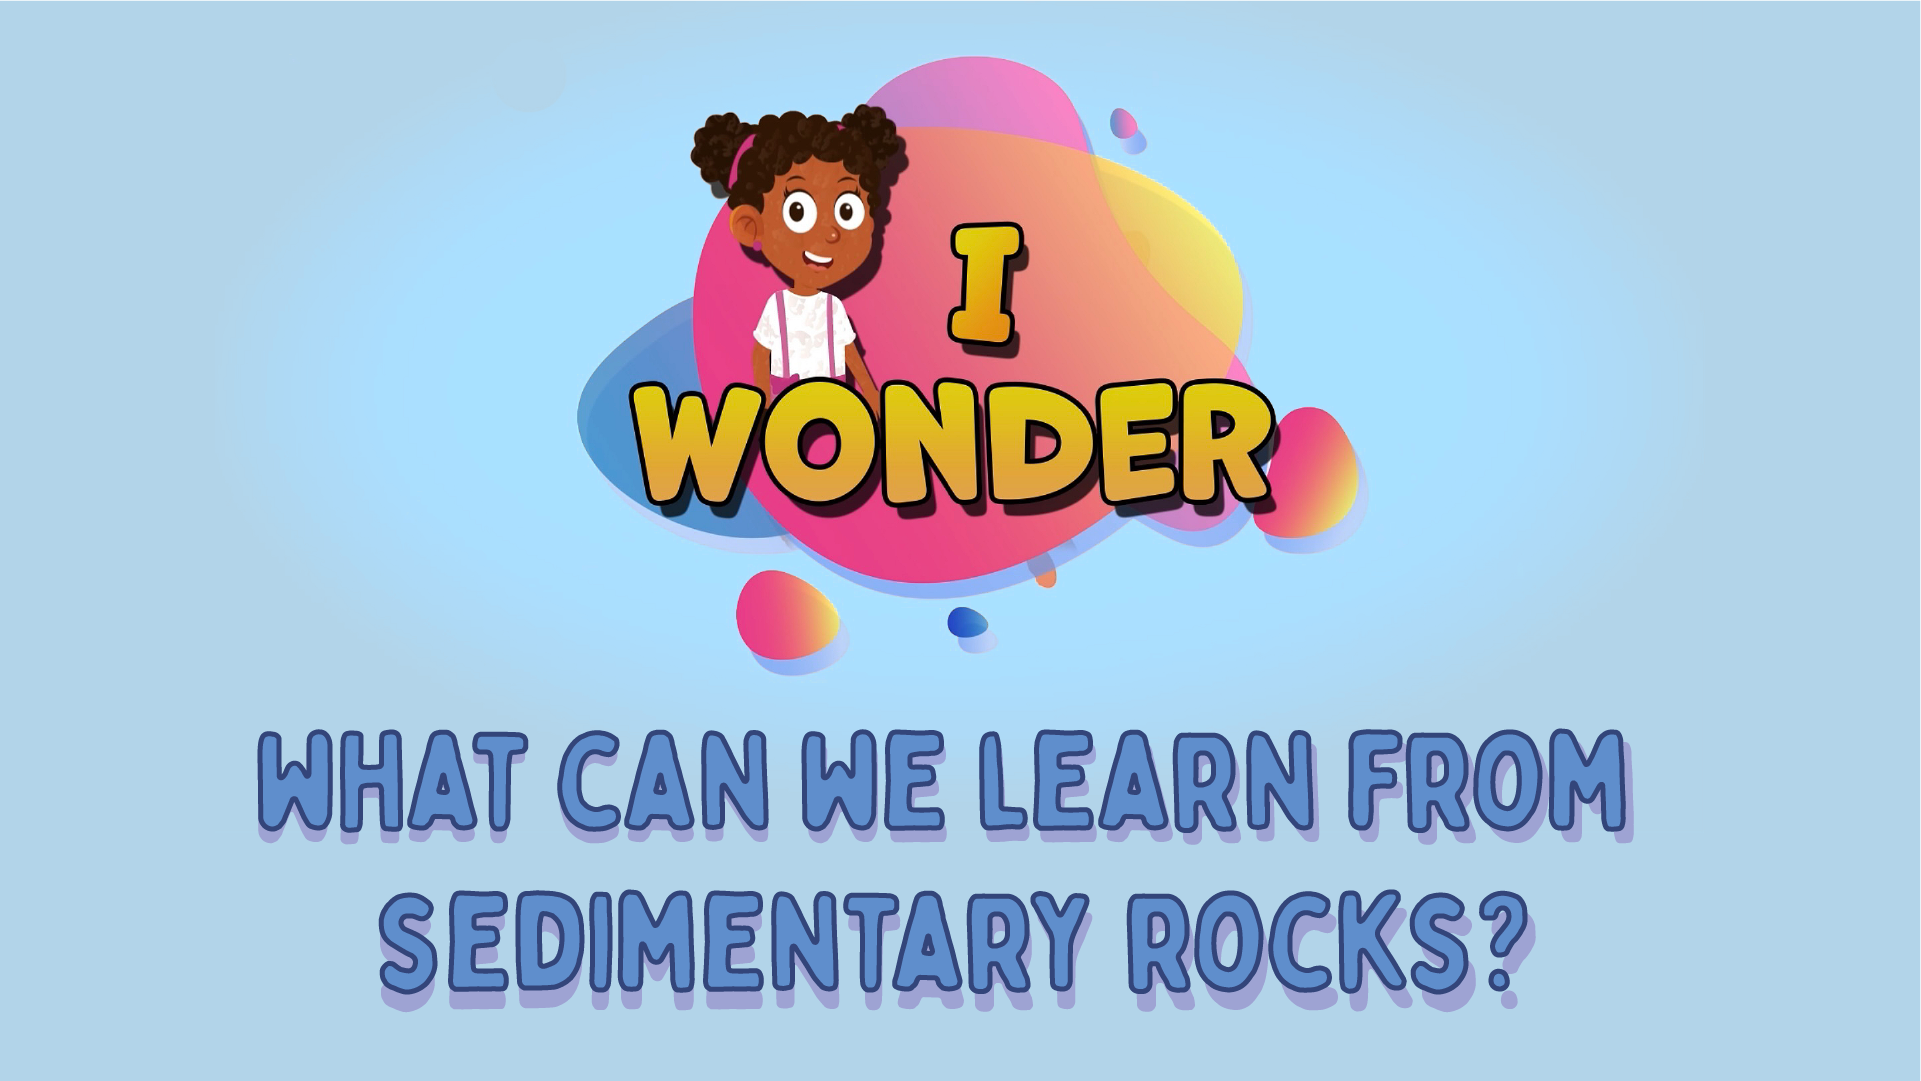 What Can We Learn From Sedimentary Rocks?